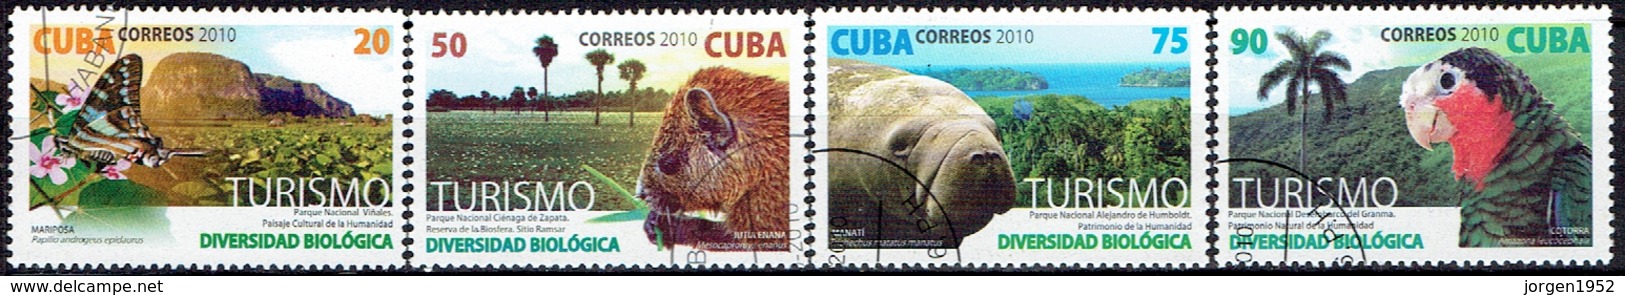 CUBA # FROM 2010 STAMPWORLD 5467-70 - Used Stamps